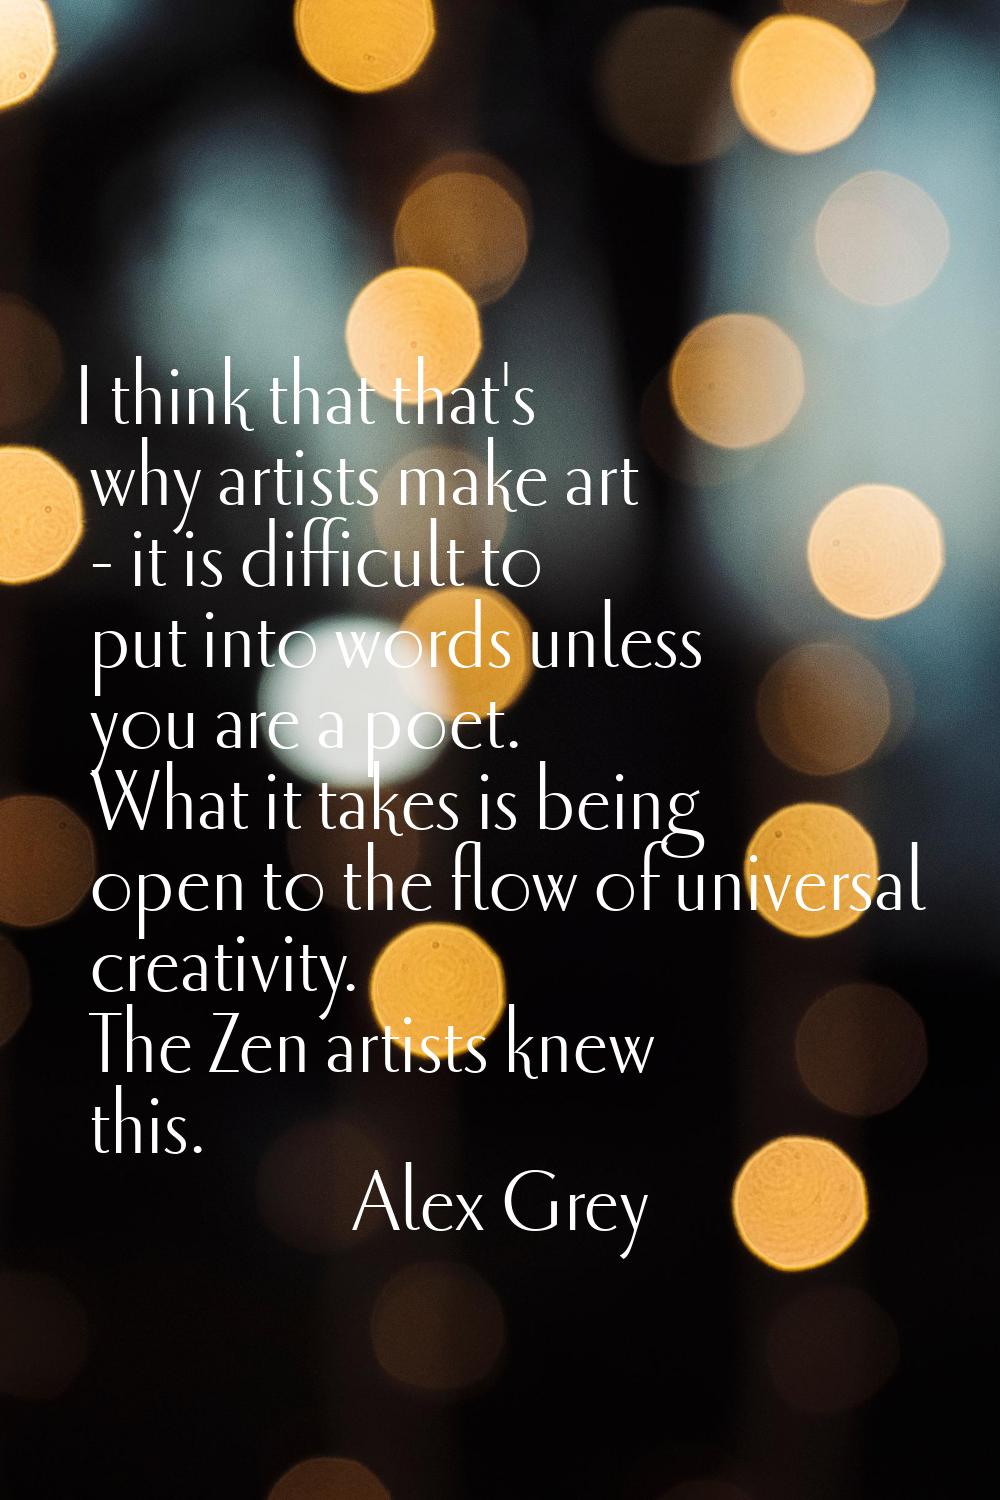 I think that that's why artists make art - it is difficult to put into words unless you are a poet.